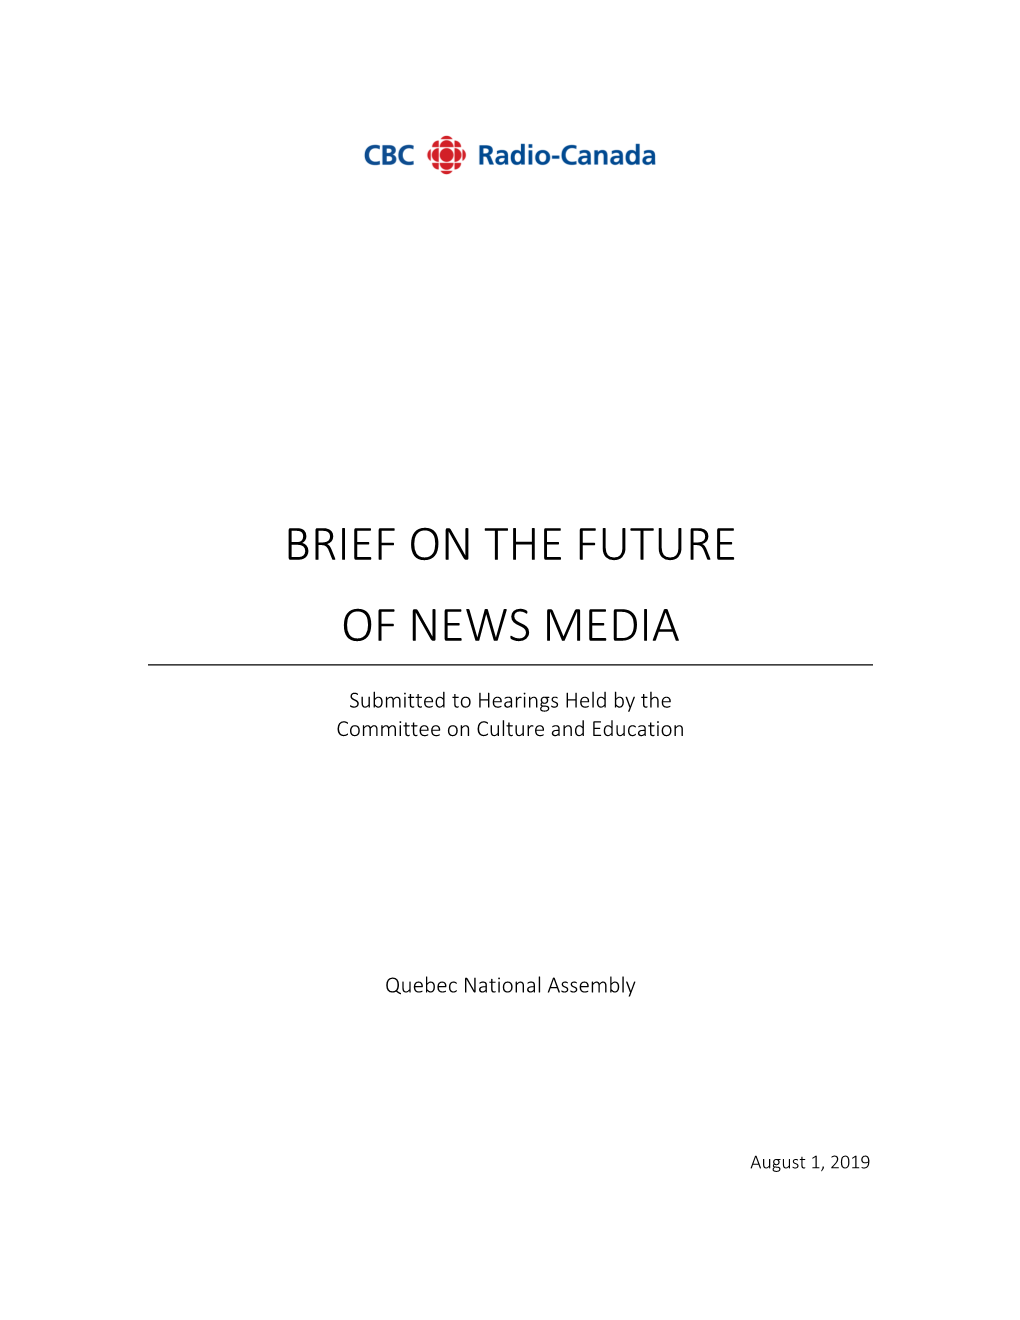 Brief on the Future of News Media